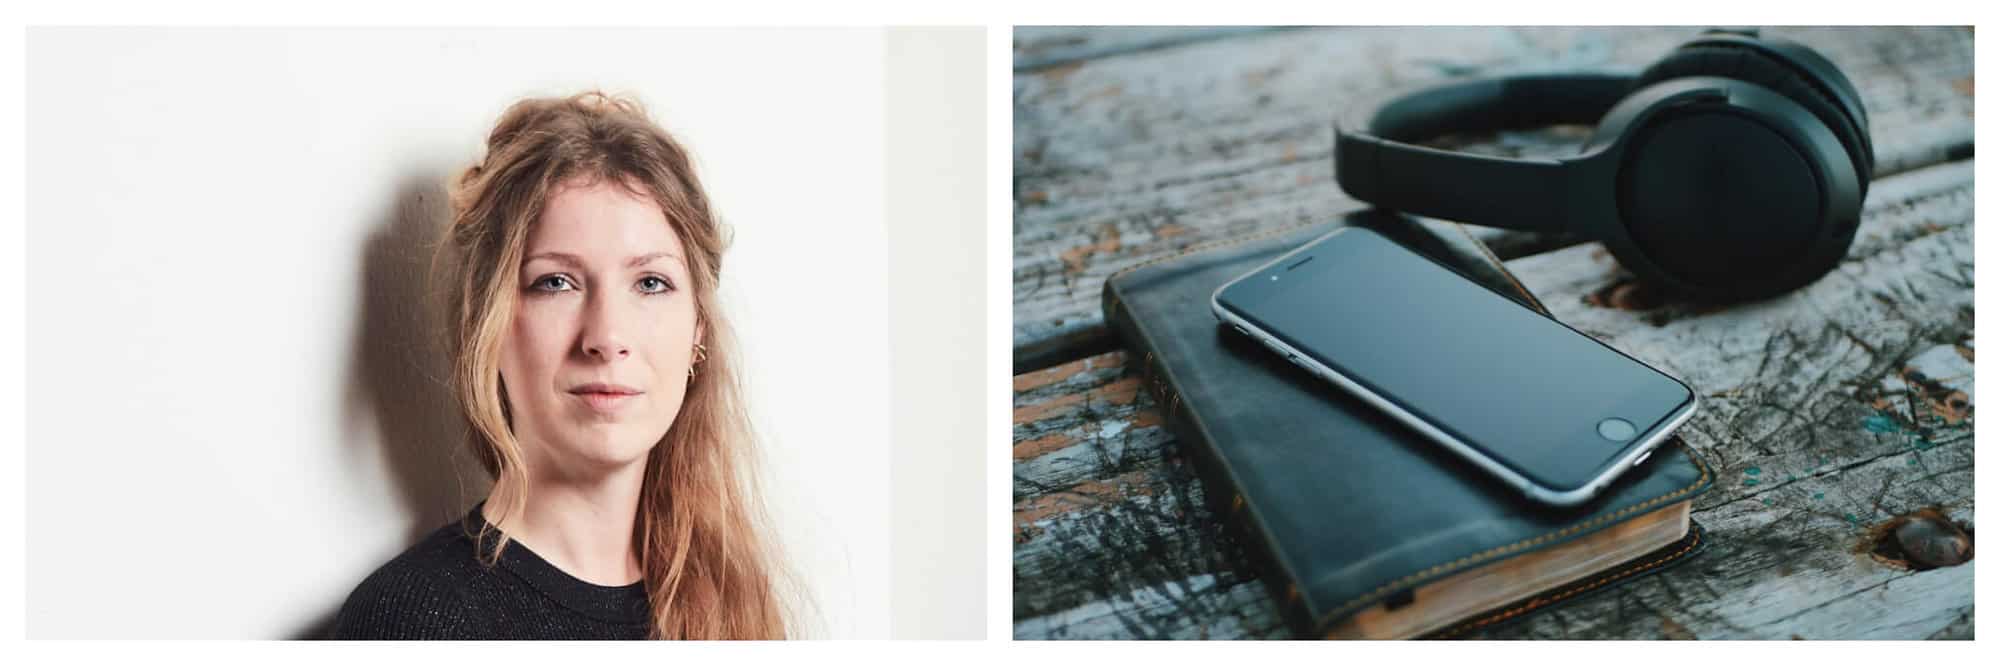 Left: A portrait of Camille Juzeau, host of Les Baladeurs podcast, standing against a blank white wall, Right: A photo of a pair of large headphonrs, an iphone and a journal on a wooden table